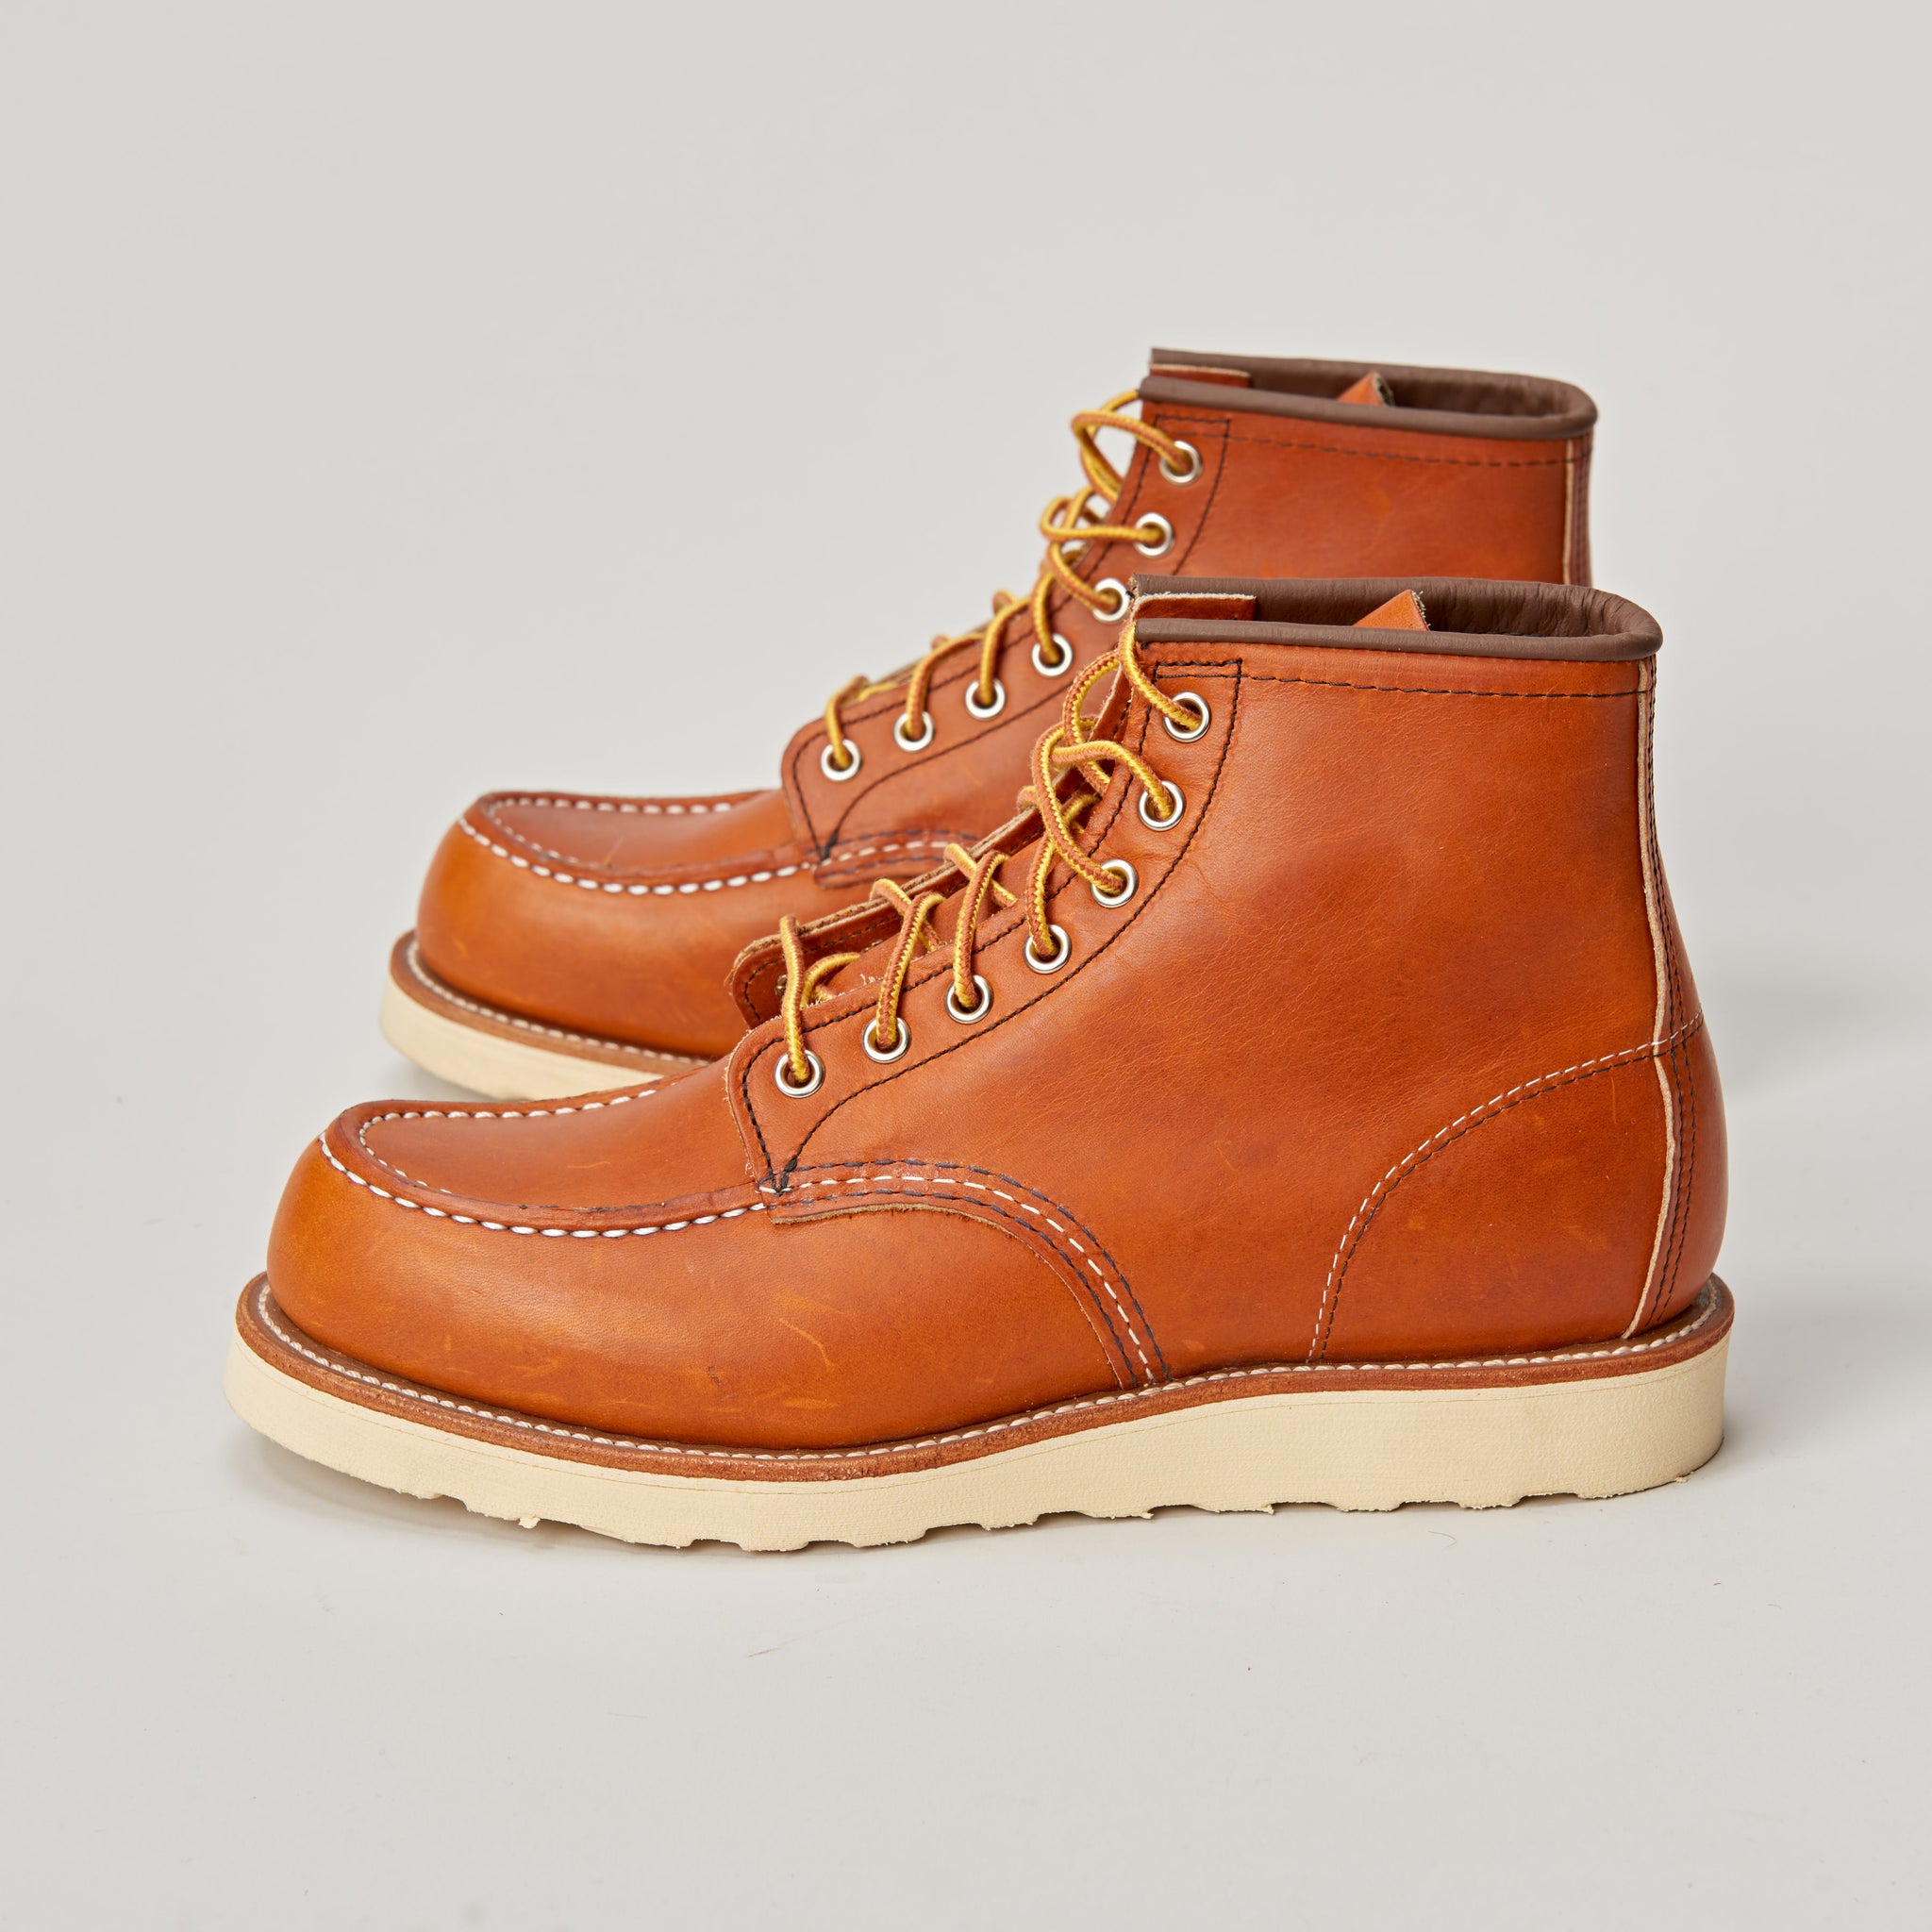 classic red wing boots